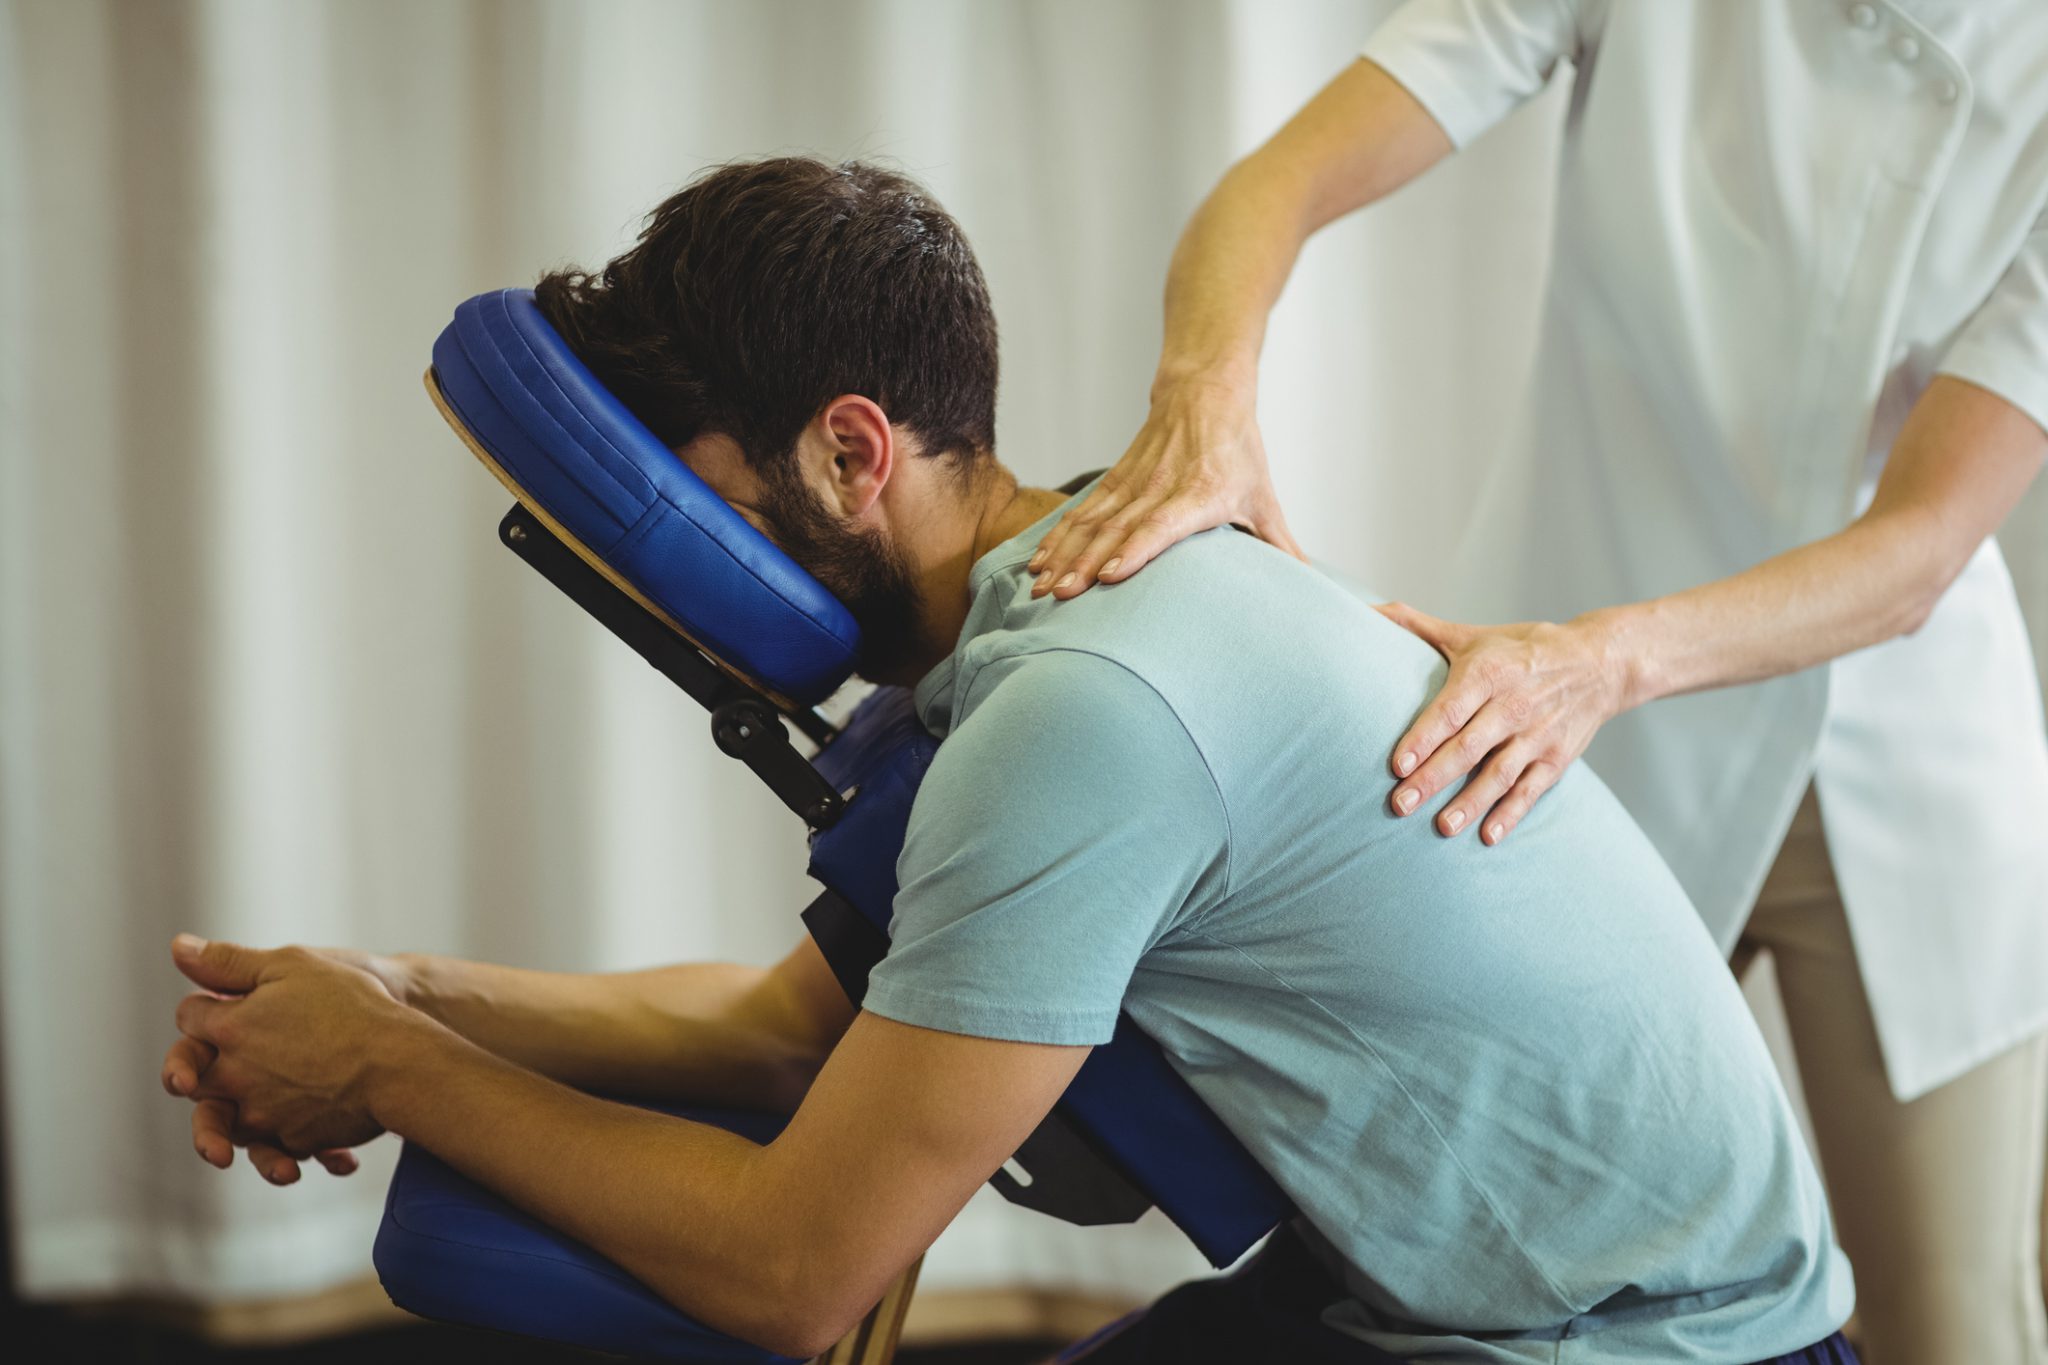 5 Career Paths To Unlock After Massage Therapy School